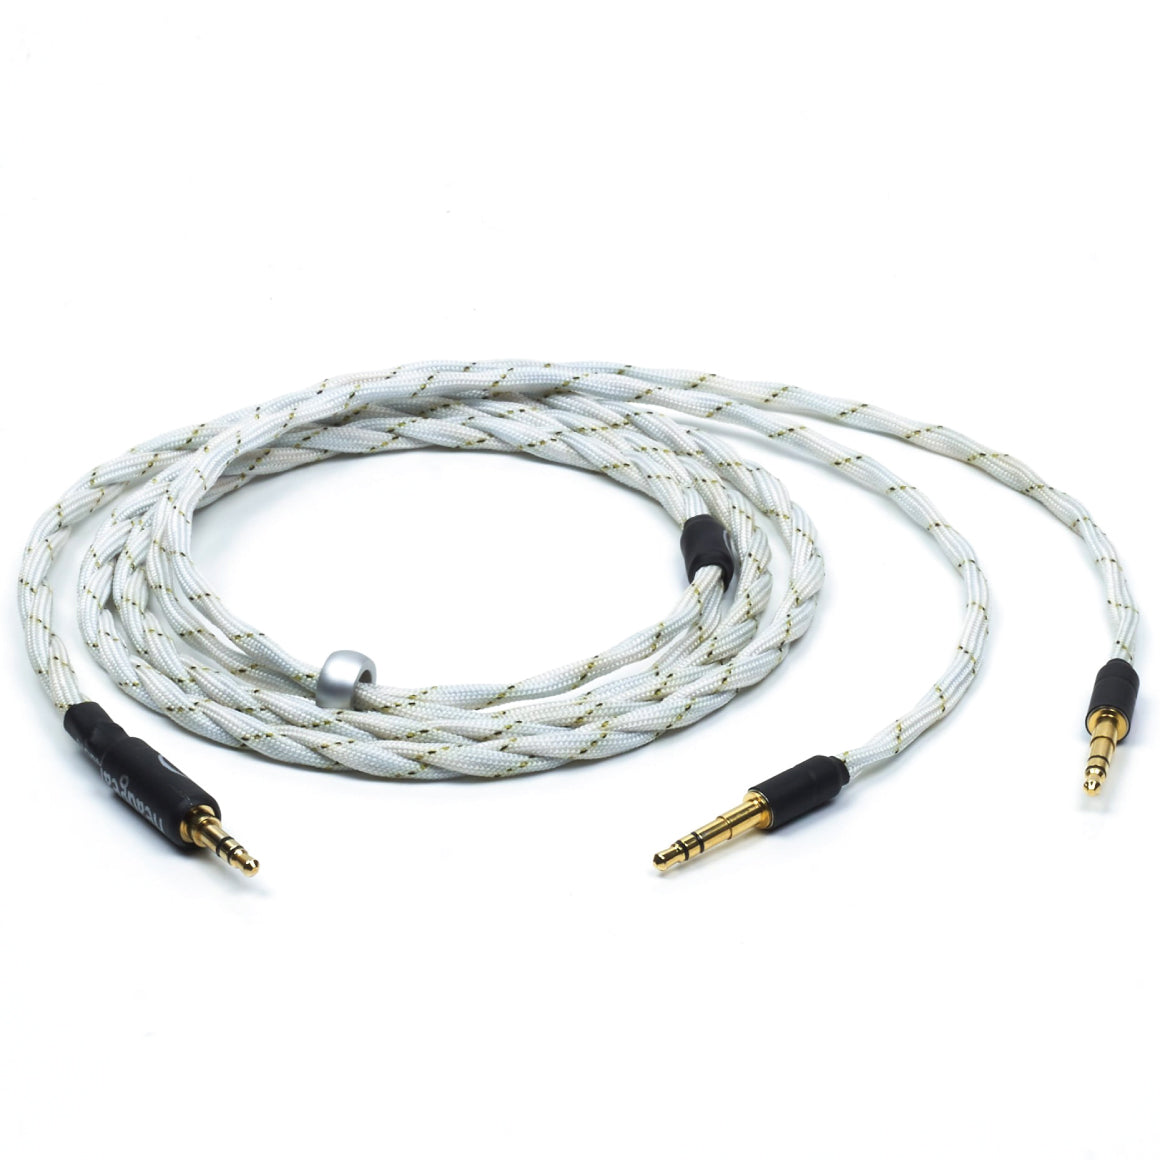 Headphone-Zone-Headgear Audio - Upgrade Cable for Beyerdynamic T1 2nd Generation / T5p Second Generation/ Sleeved - 3.5mm Single Ended For Portable Devices